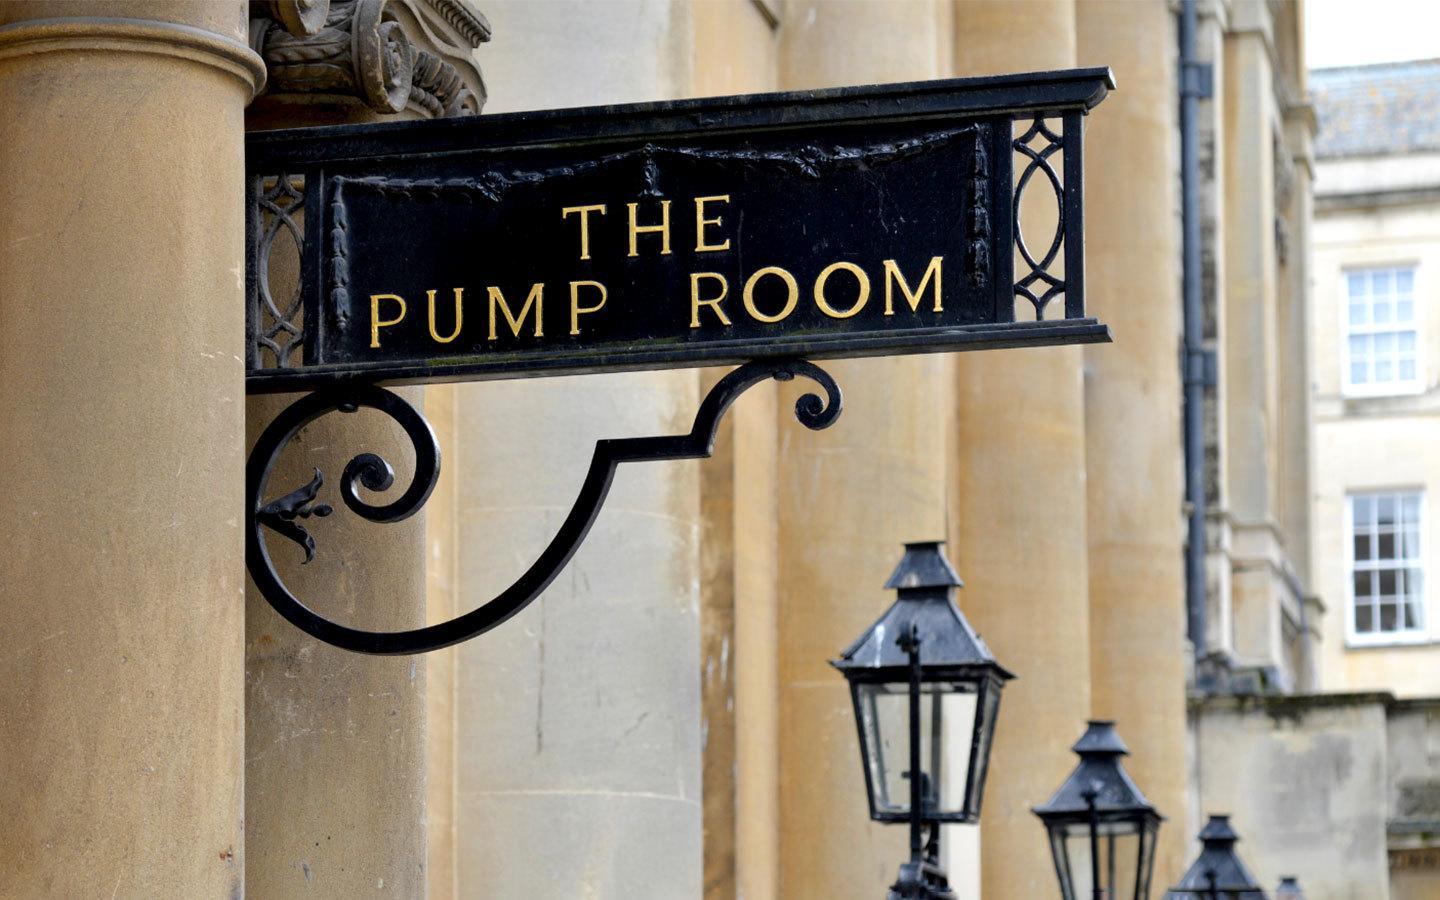 Entrance to the Pump Room in Bath